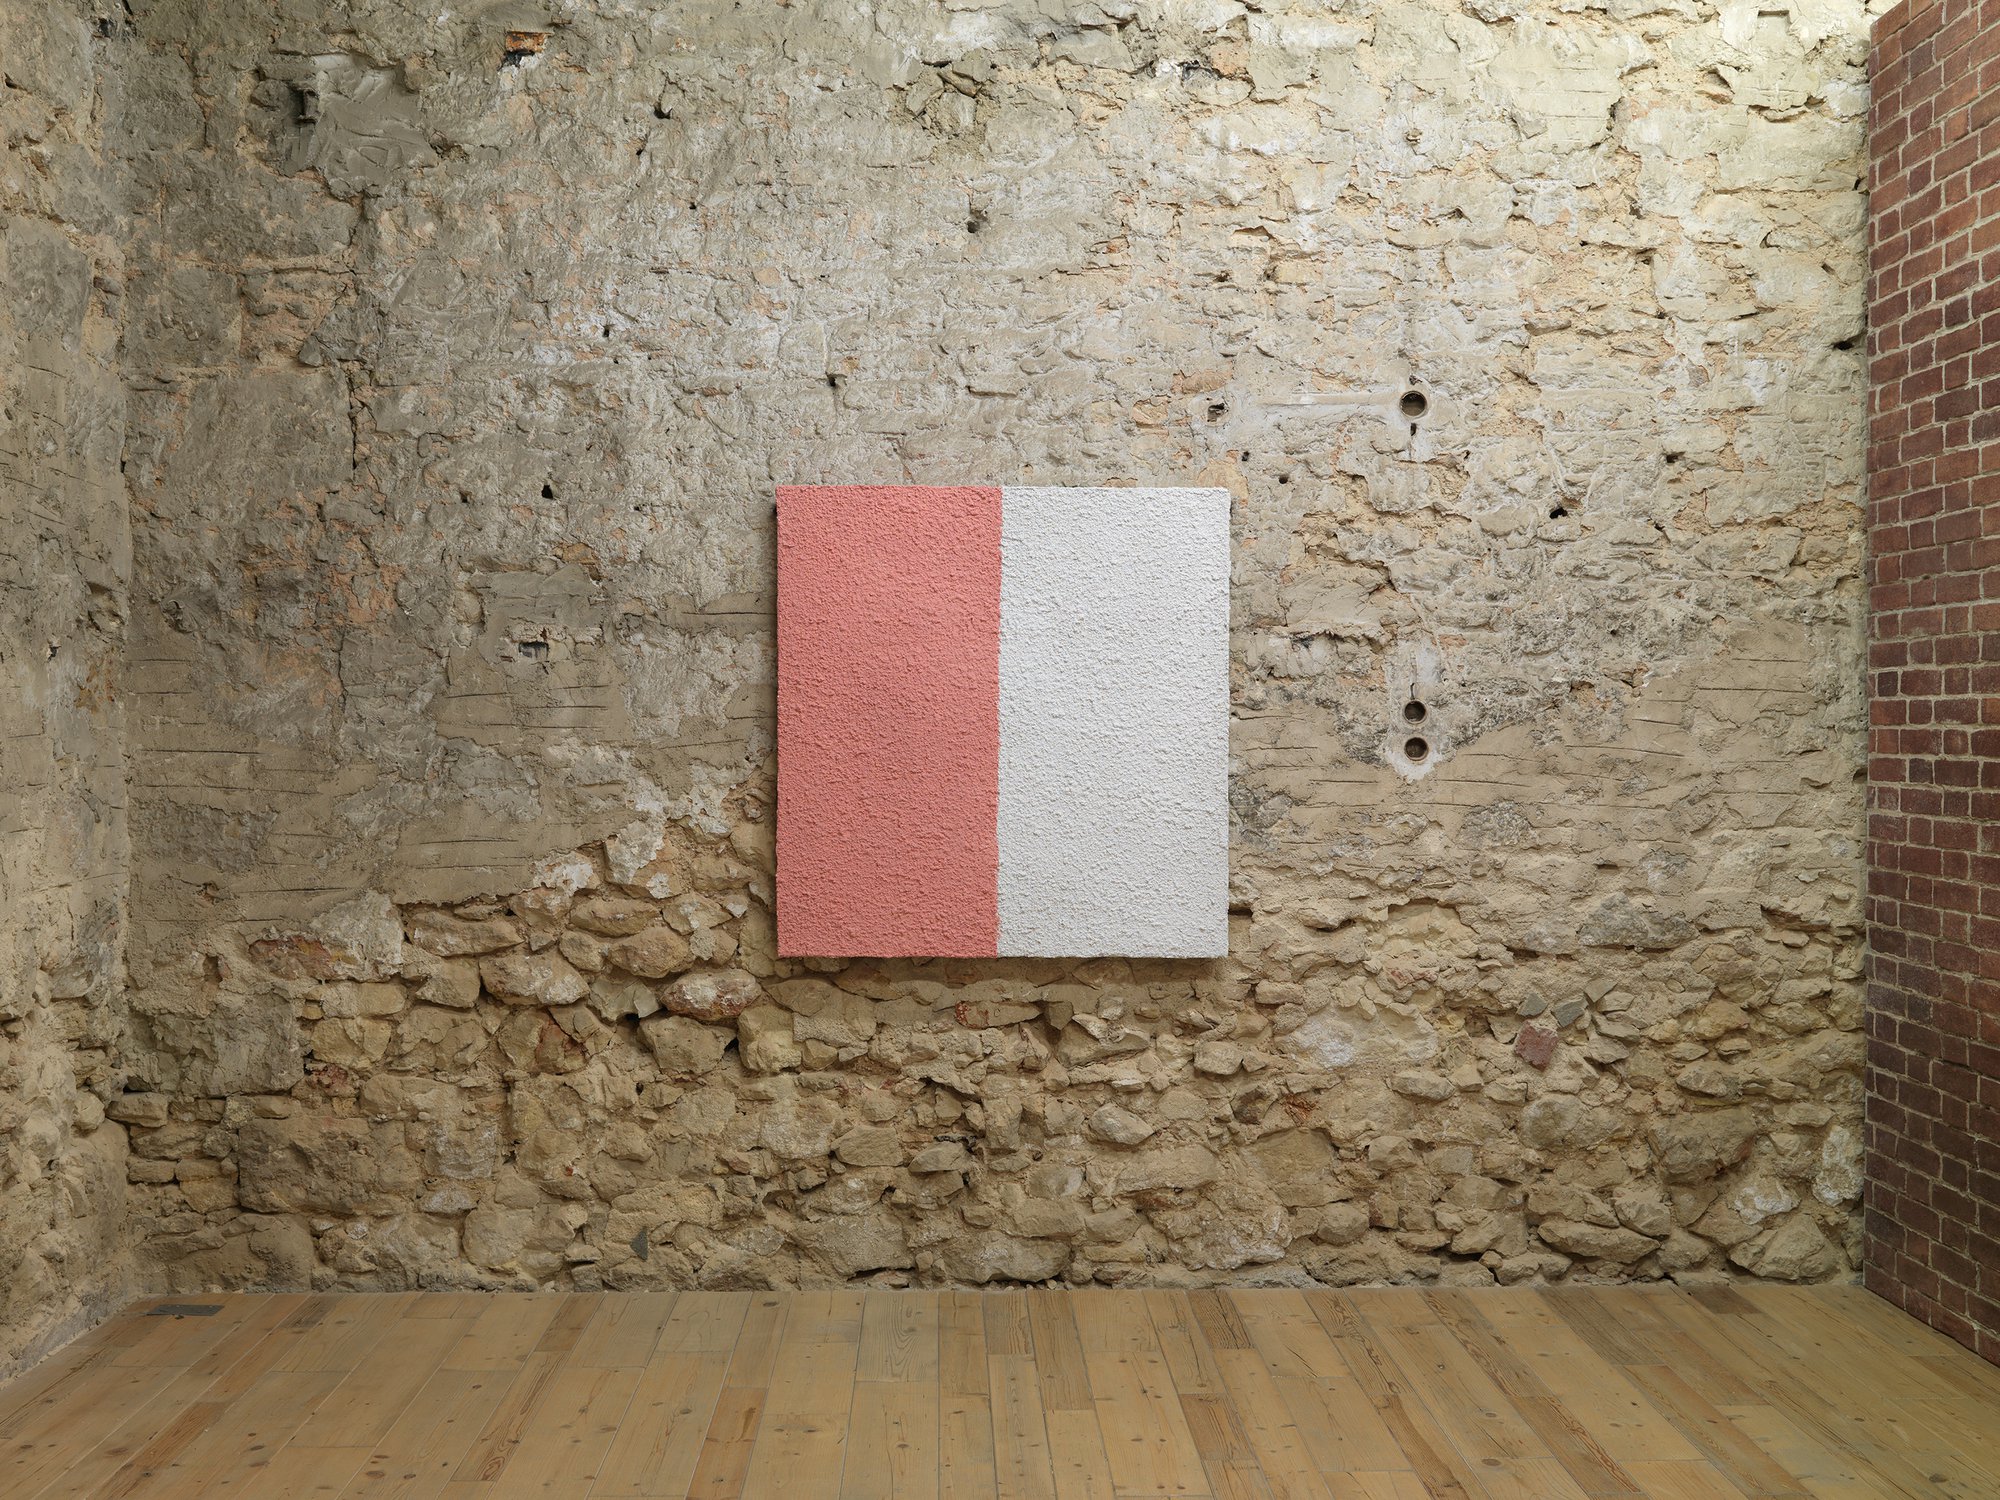 Christodoulos Panayiotou, Untitled (Spritz), stucco plaster finish, wall paint, foam board, mortar, wooden frame, 127.5 x 121 x 6 cm, 2021